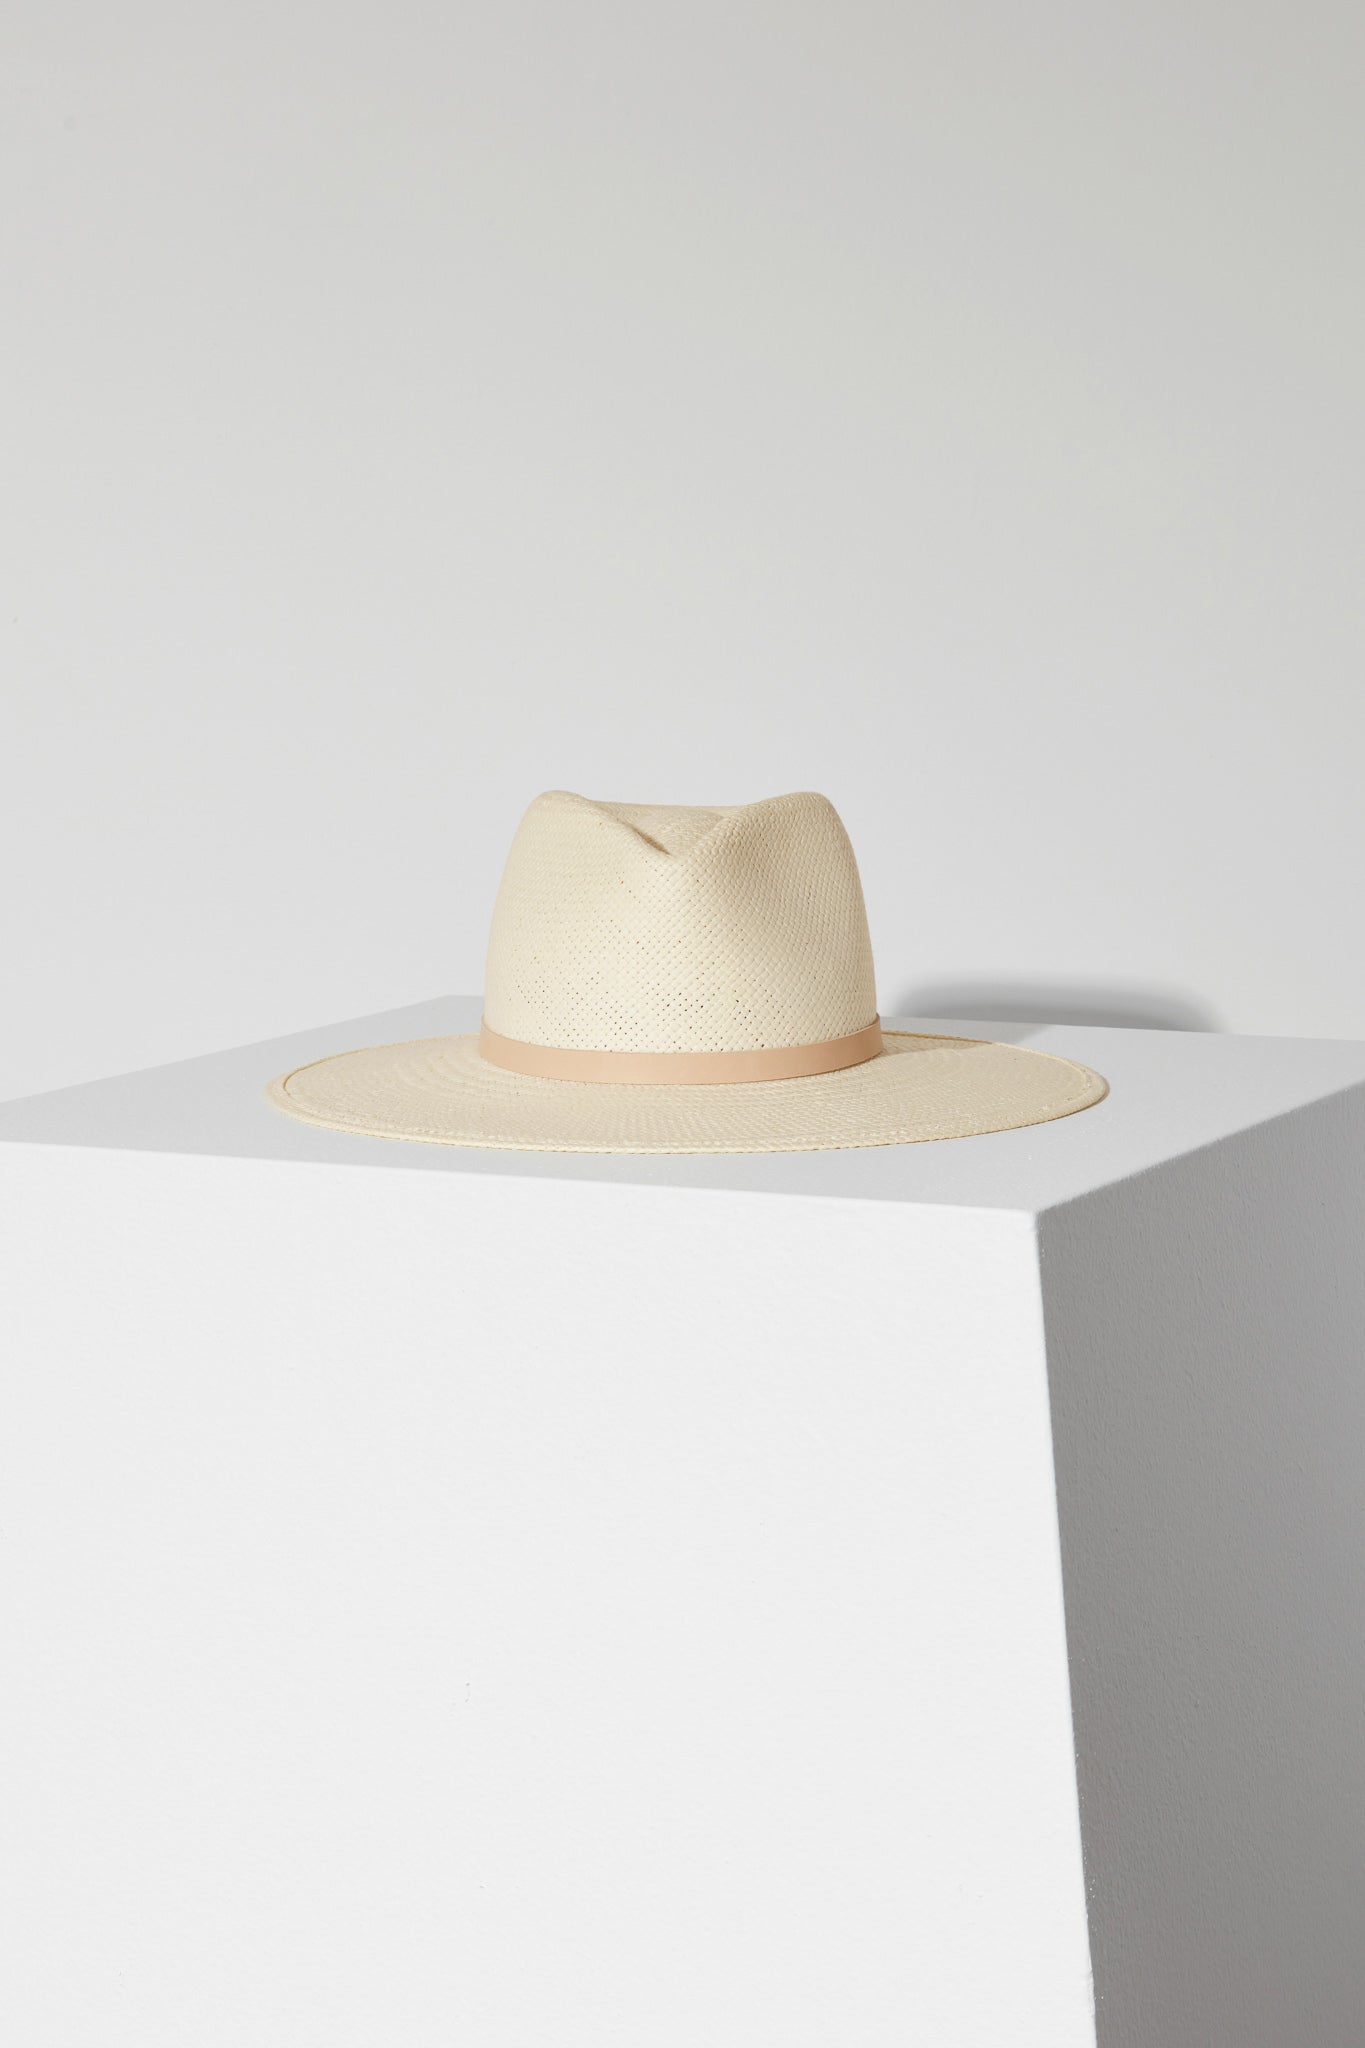 HATS Sherman Hat in Natural Janessa Leone